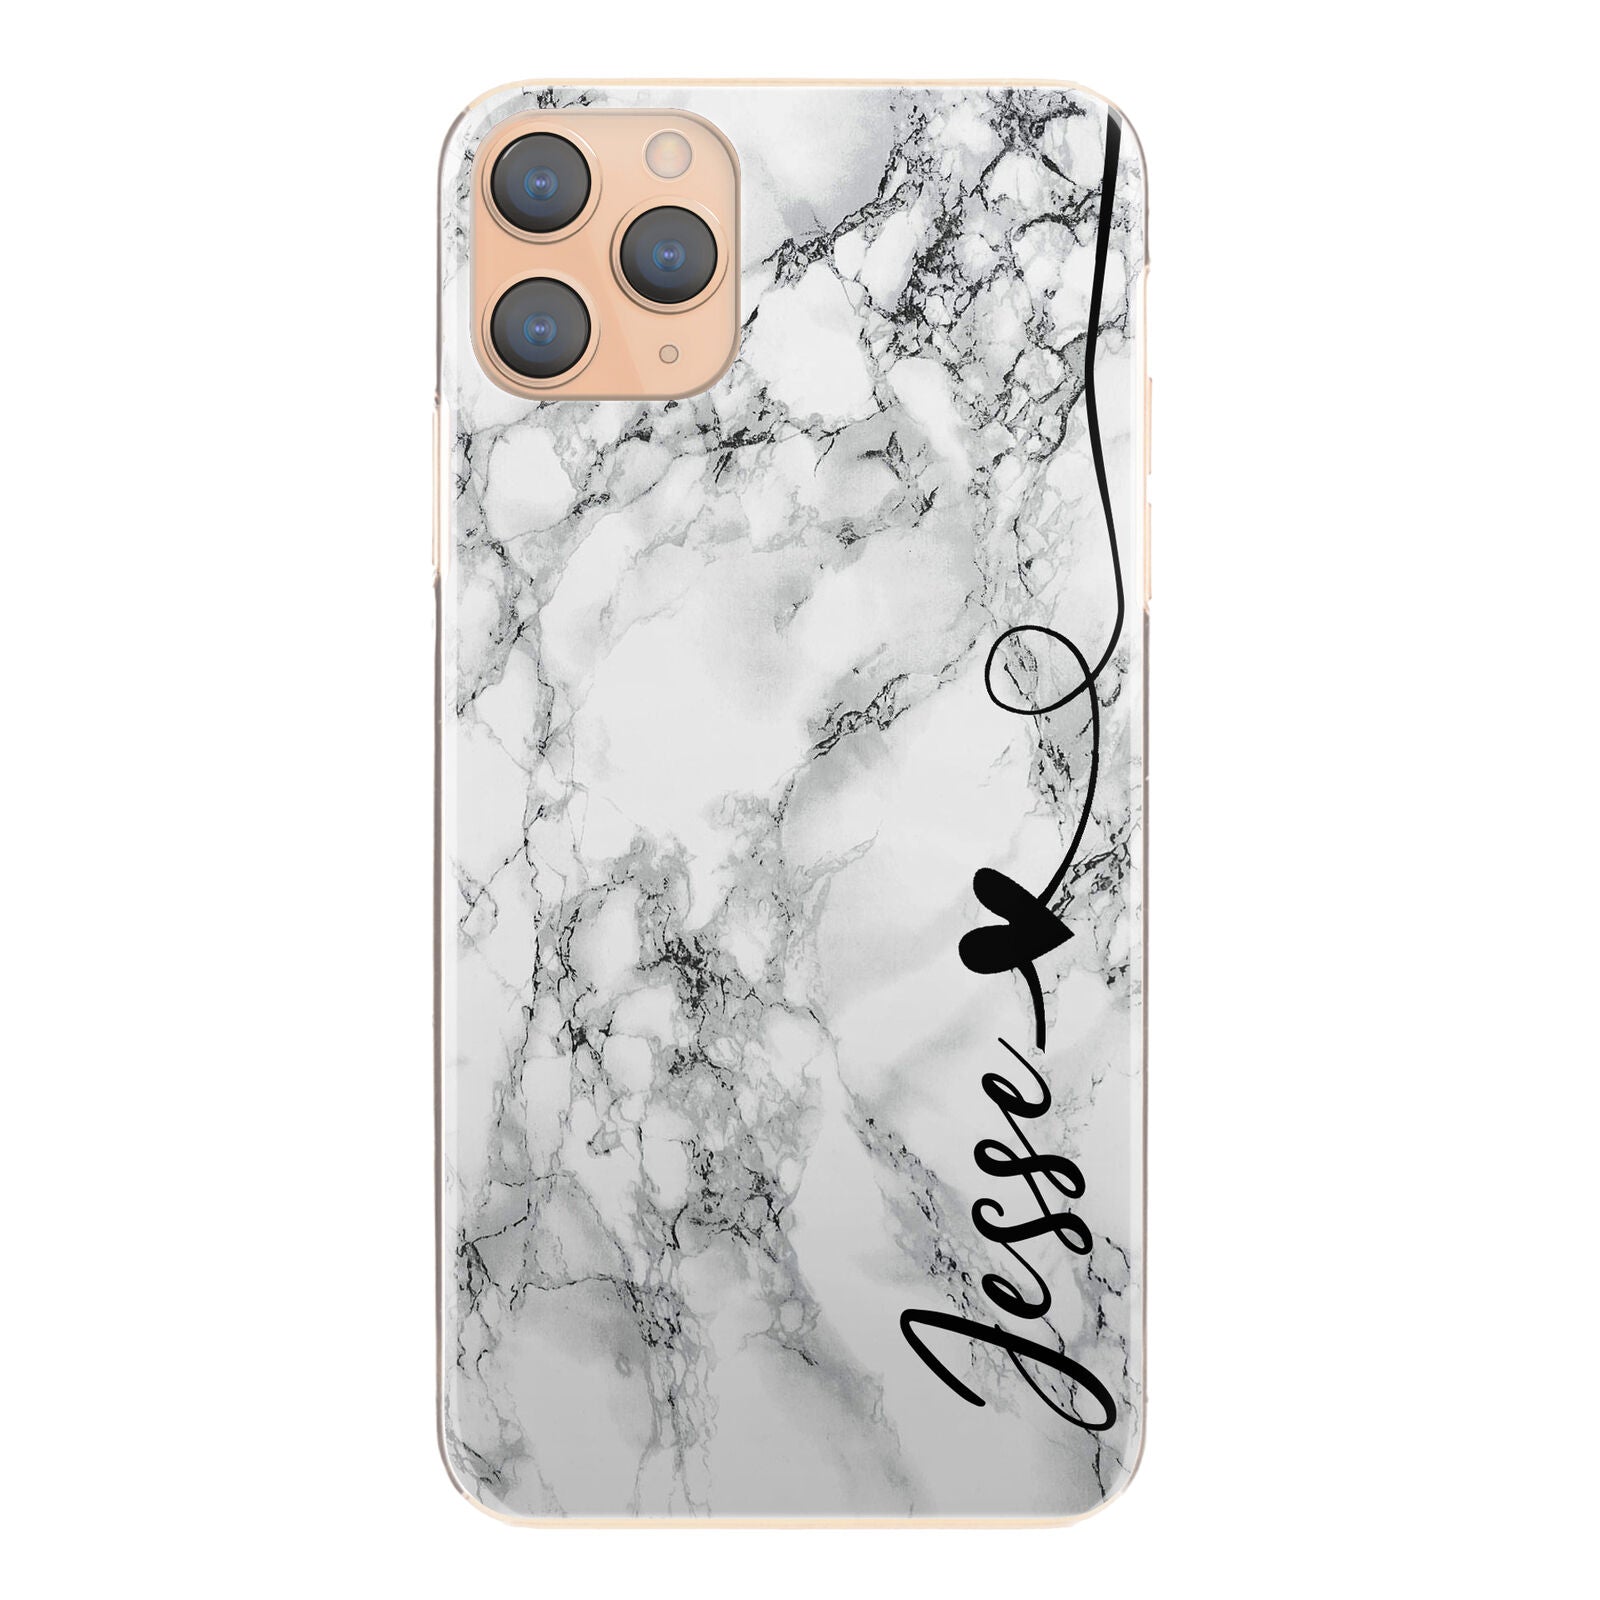 Personalised Phone Case For iPhone 11 Pro, Initial Grey/Black Marble Hard Cover